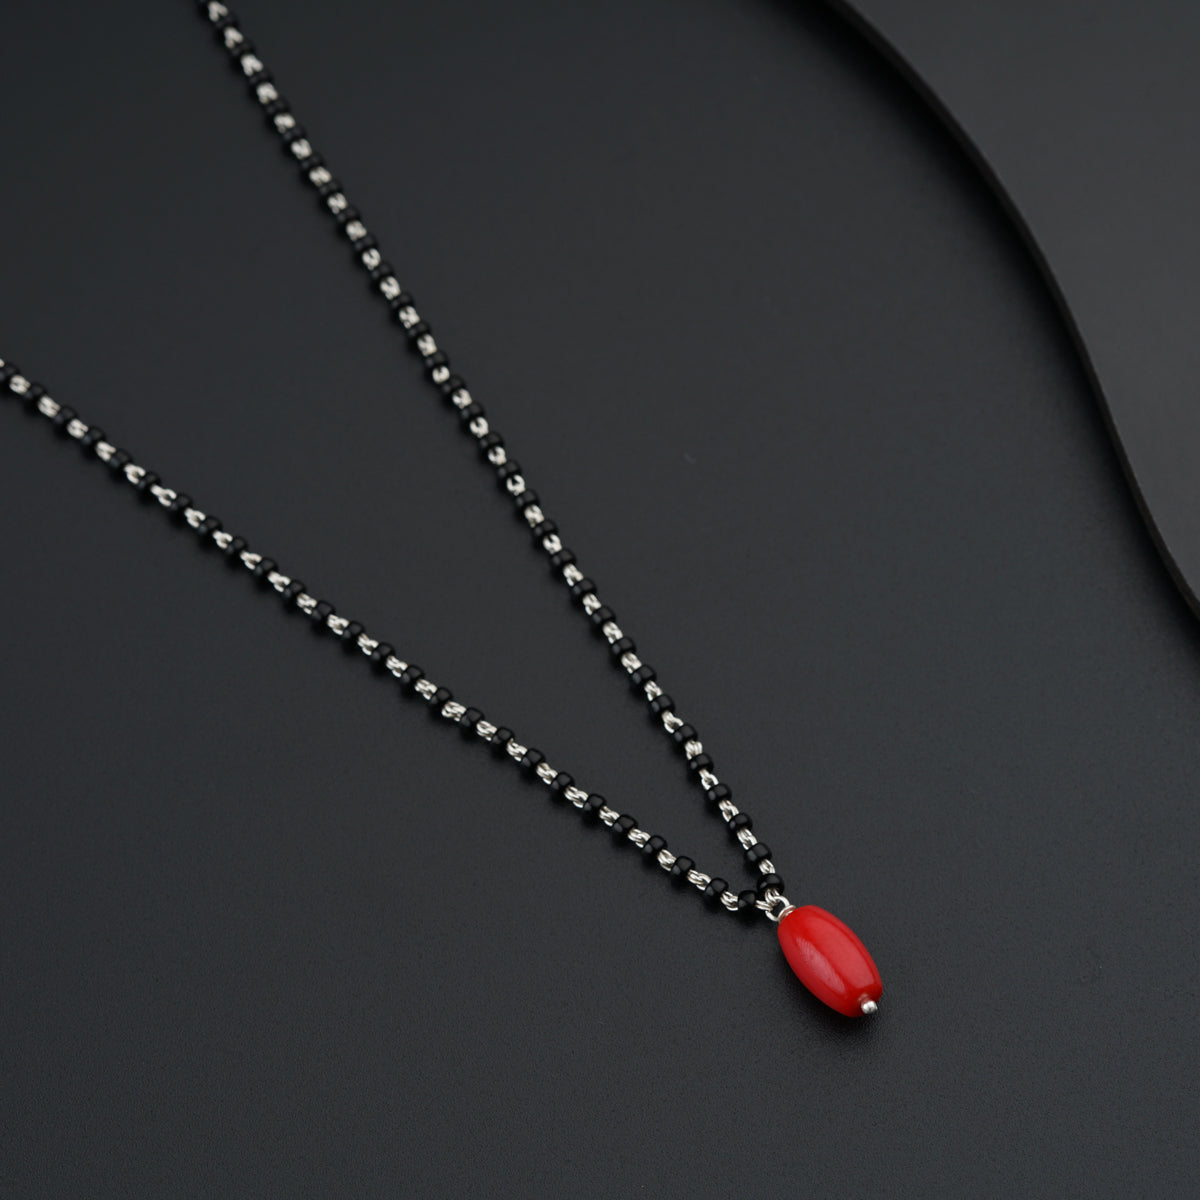 a necklace with a red pendant on a black surface